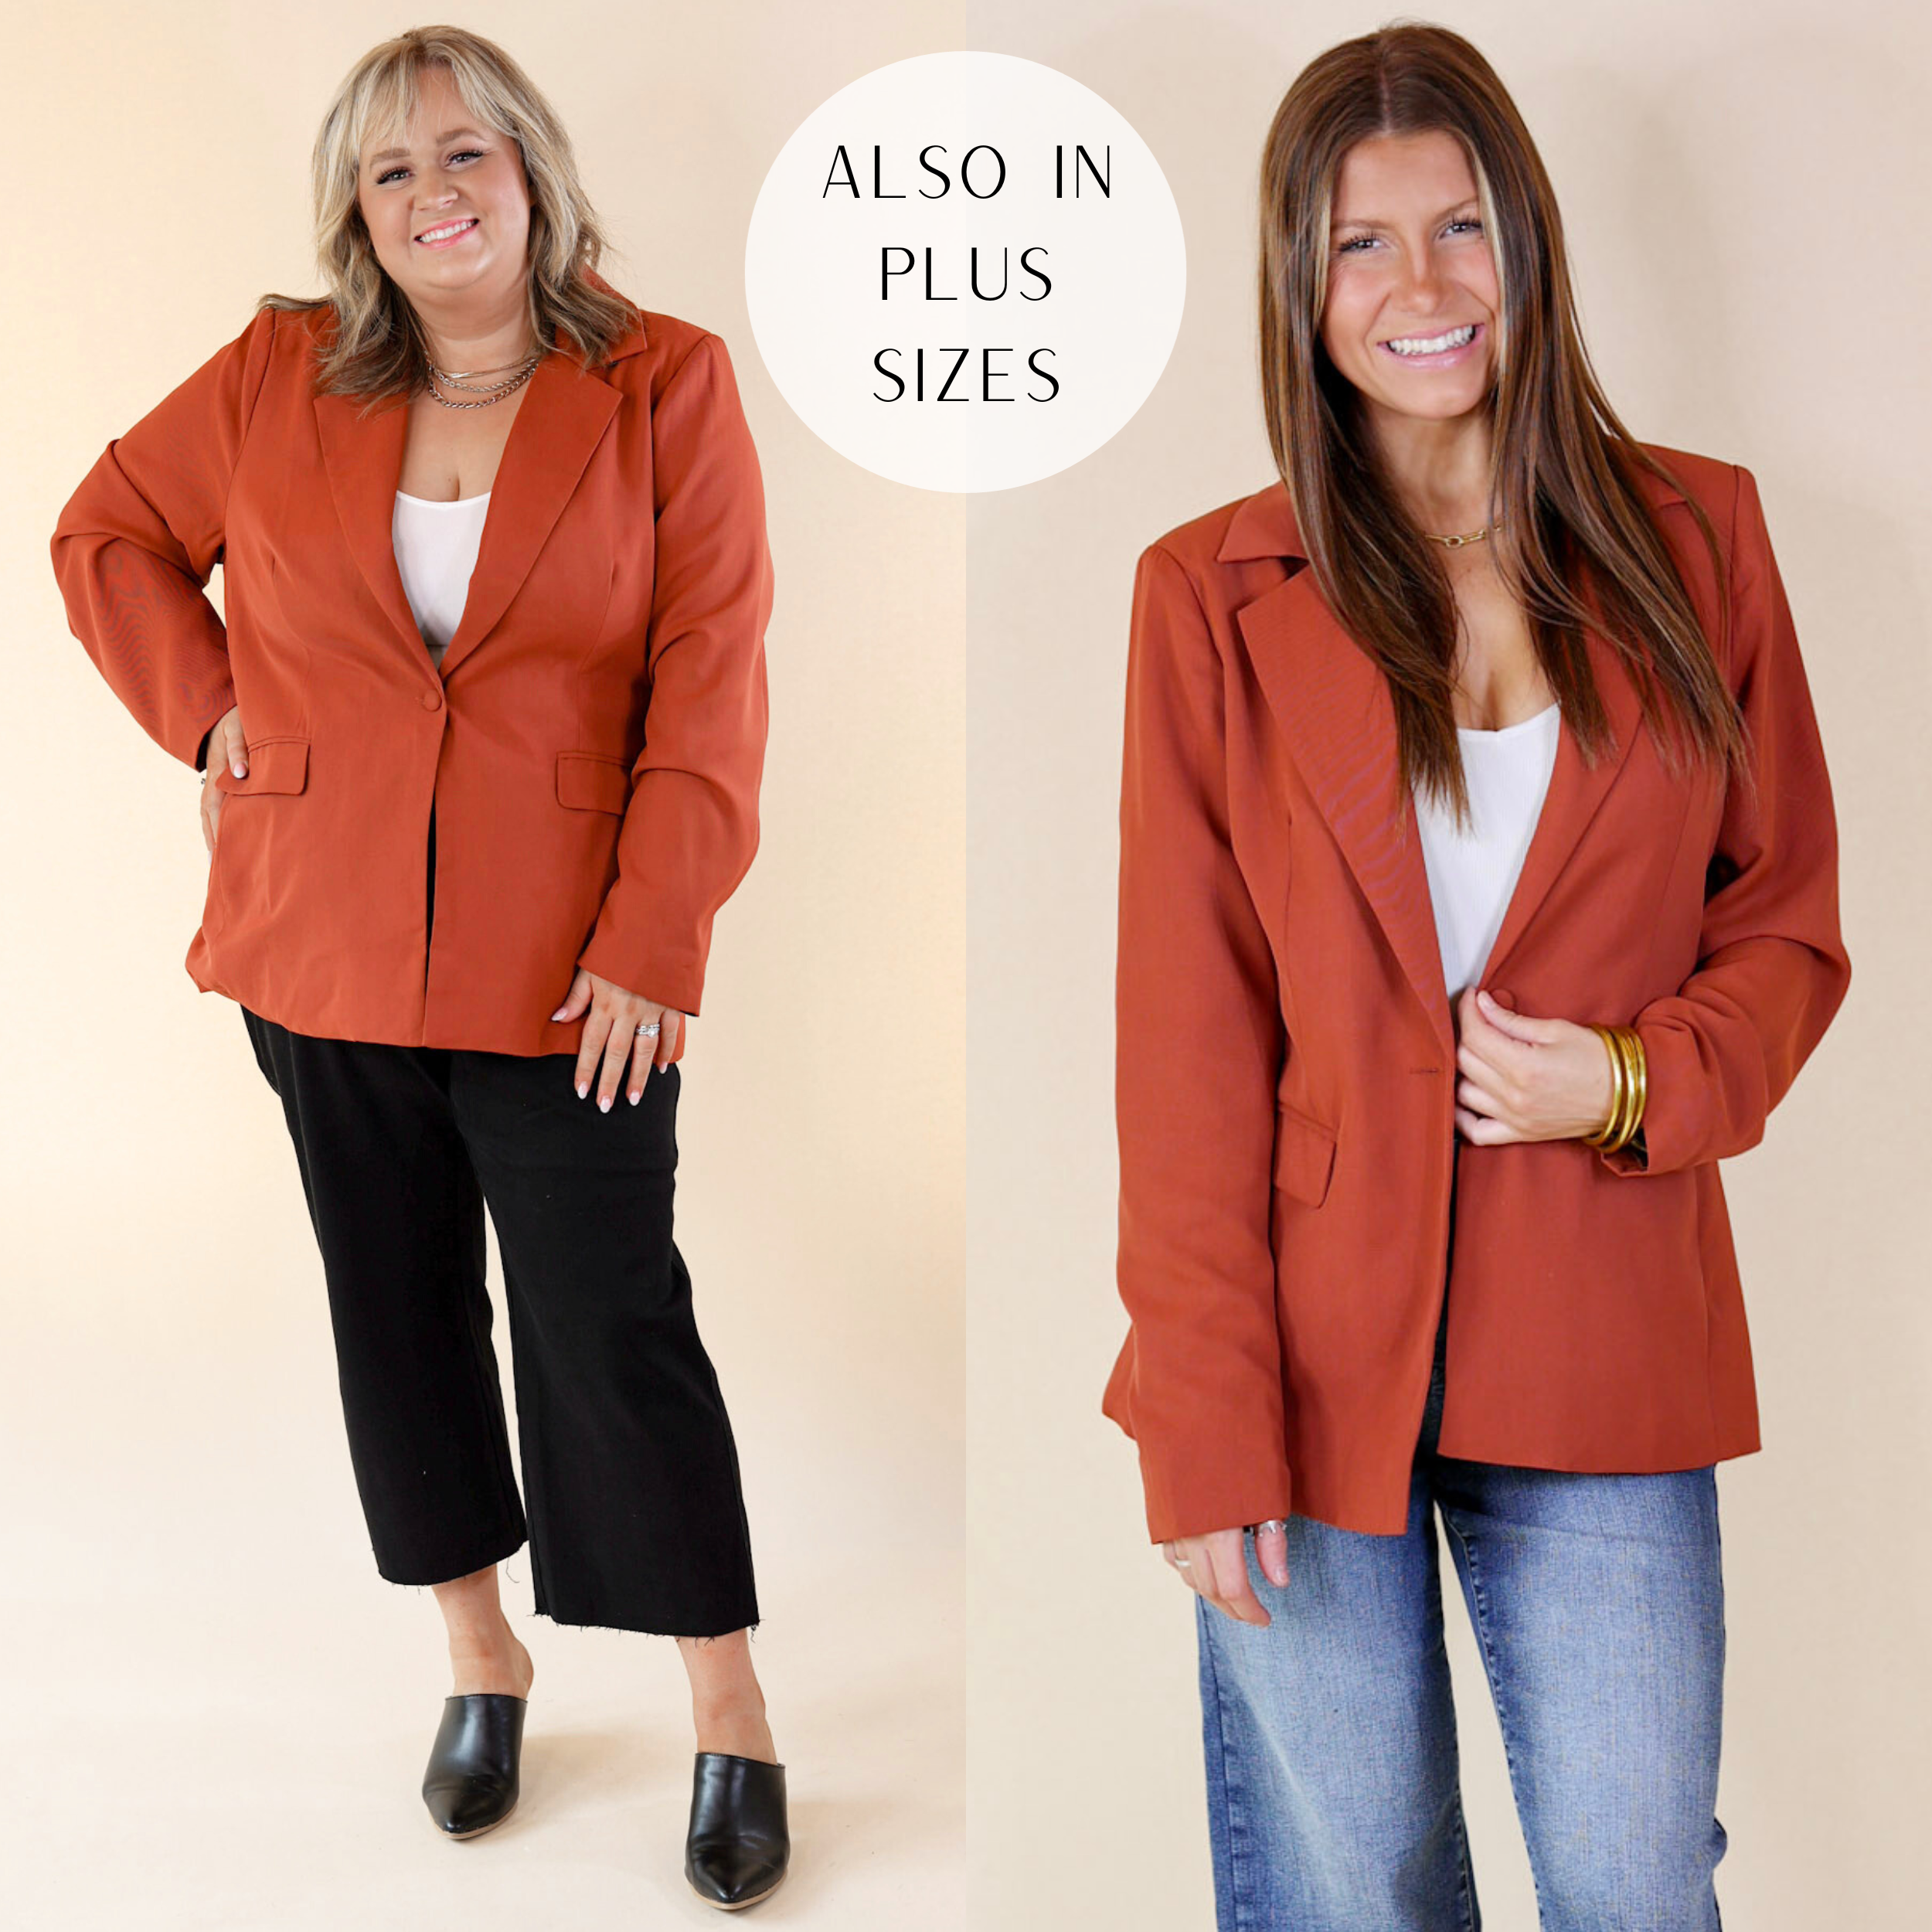 Winning Awards Long Sleeve Blazer in Rust Brown - Giddy Up Glamour Boutique